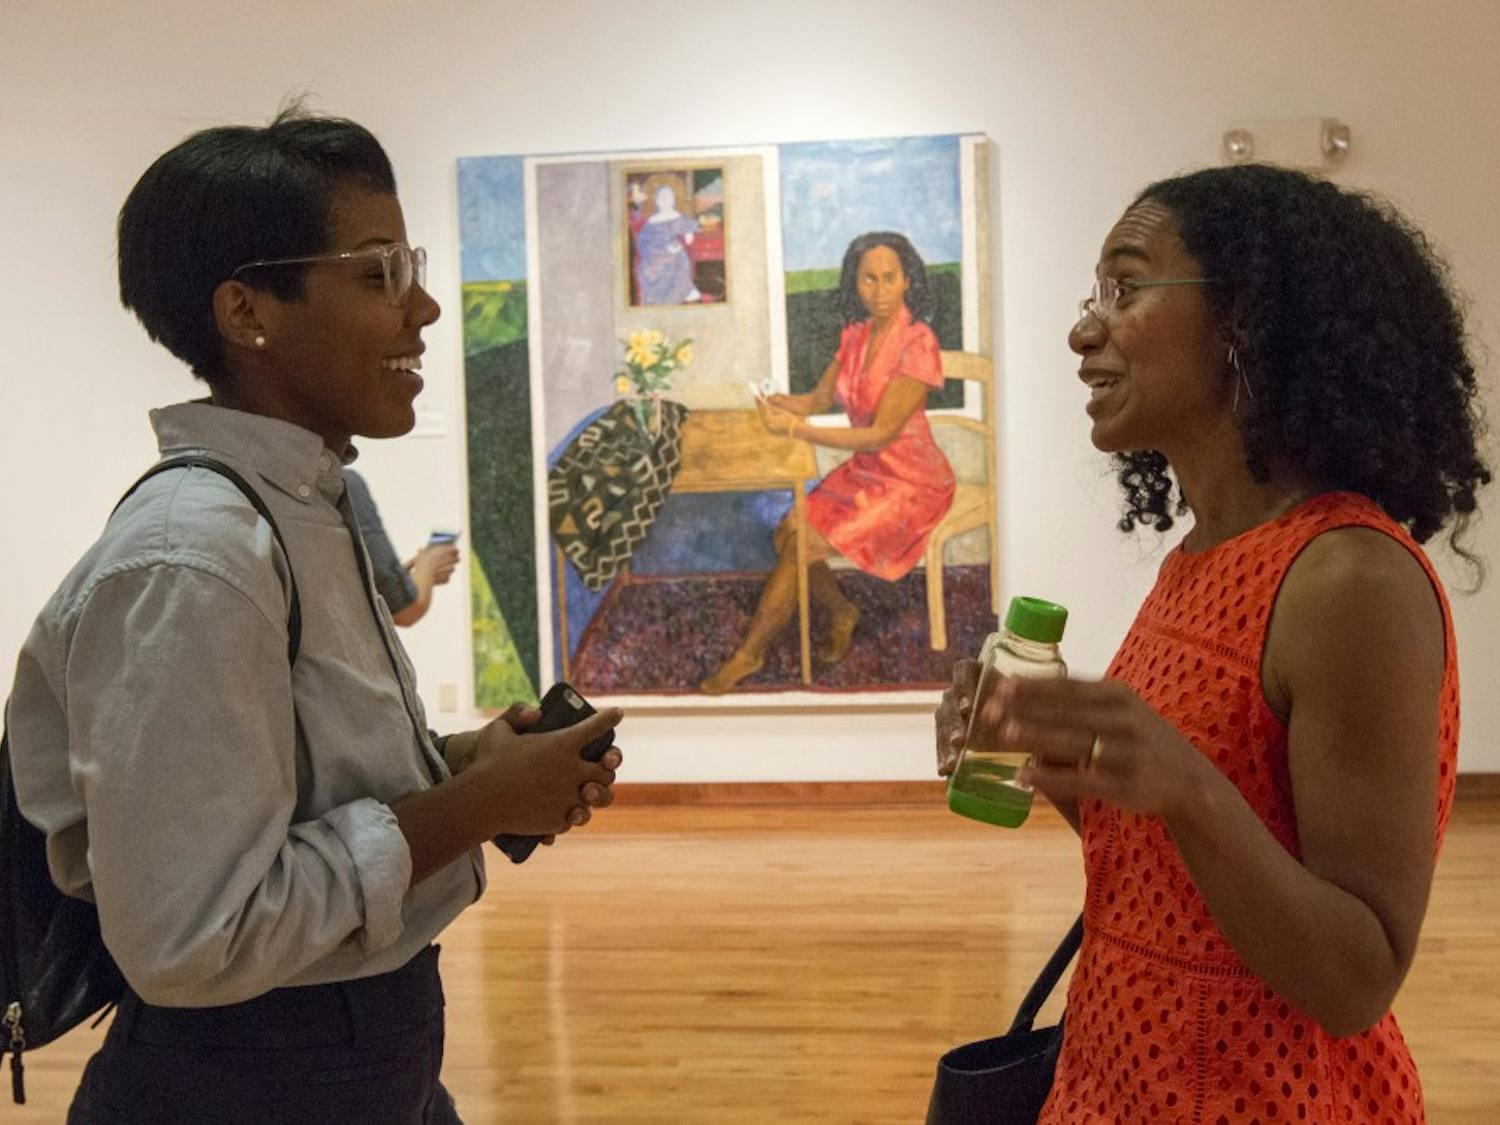 Christina Perkins (left) talks with artist Mequitta Ahuja (right) about her artwork during her exhibit, Meaningful Fiction and the Figurative Tradition, in the Sonja Haynes Stone Center for Black Culture and History on Thursday evening.&nbsp;